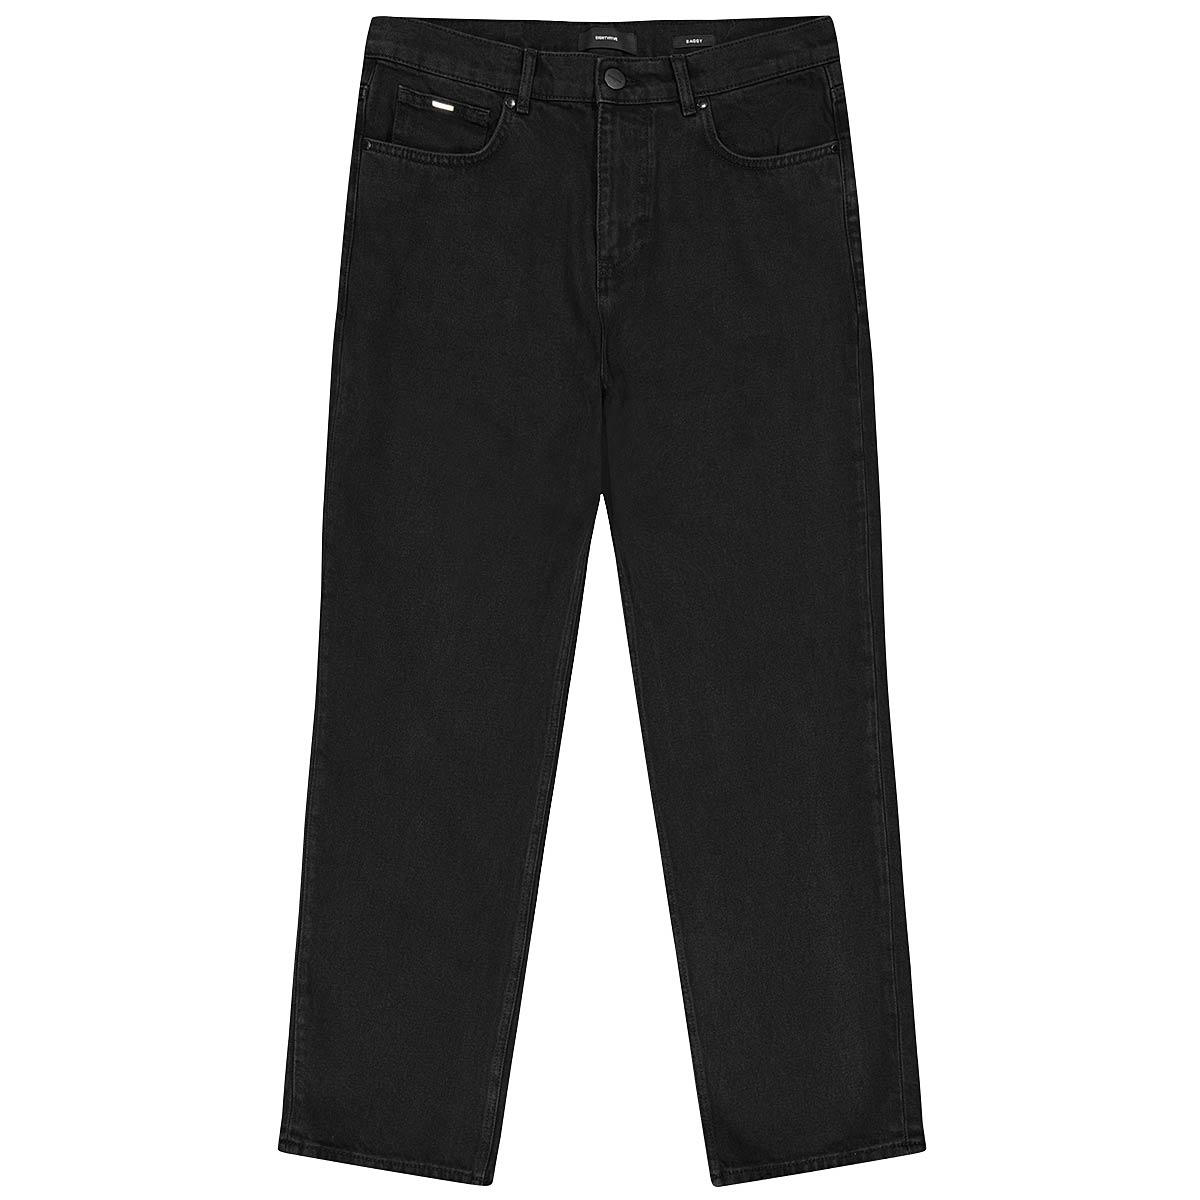 Buy Baggy Jeans for EUR 77.90 on KICKZ.com!